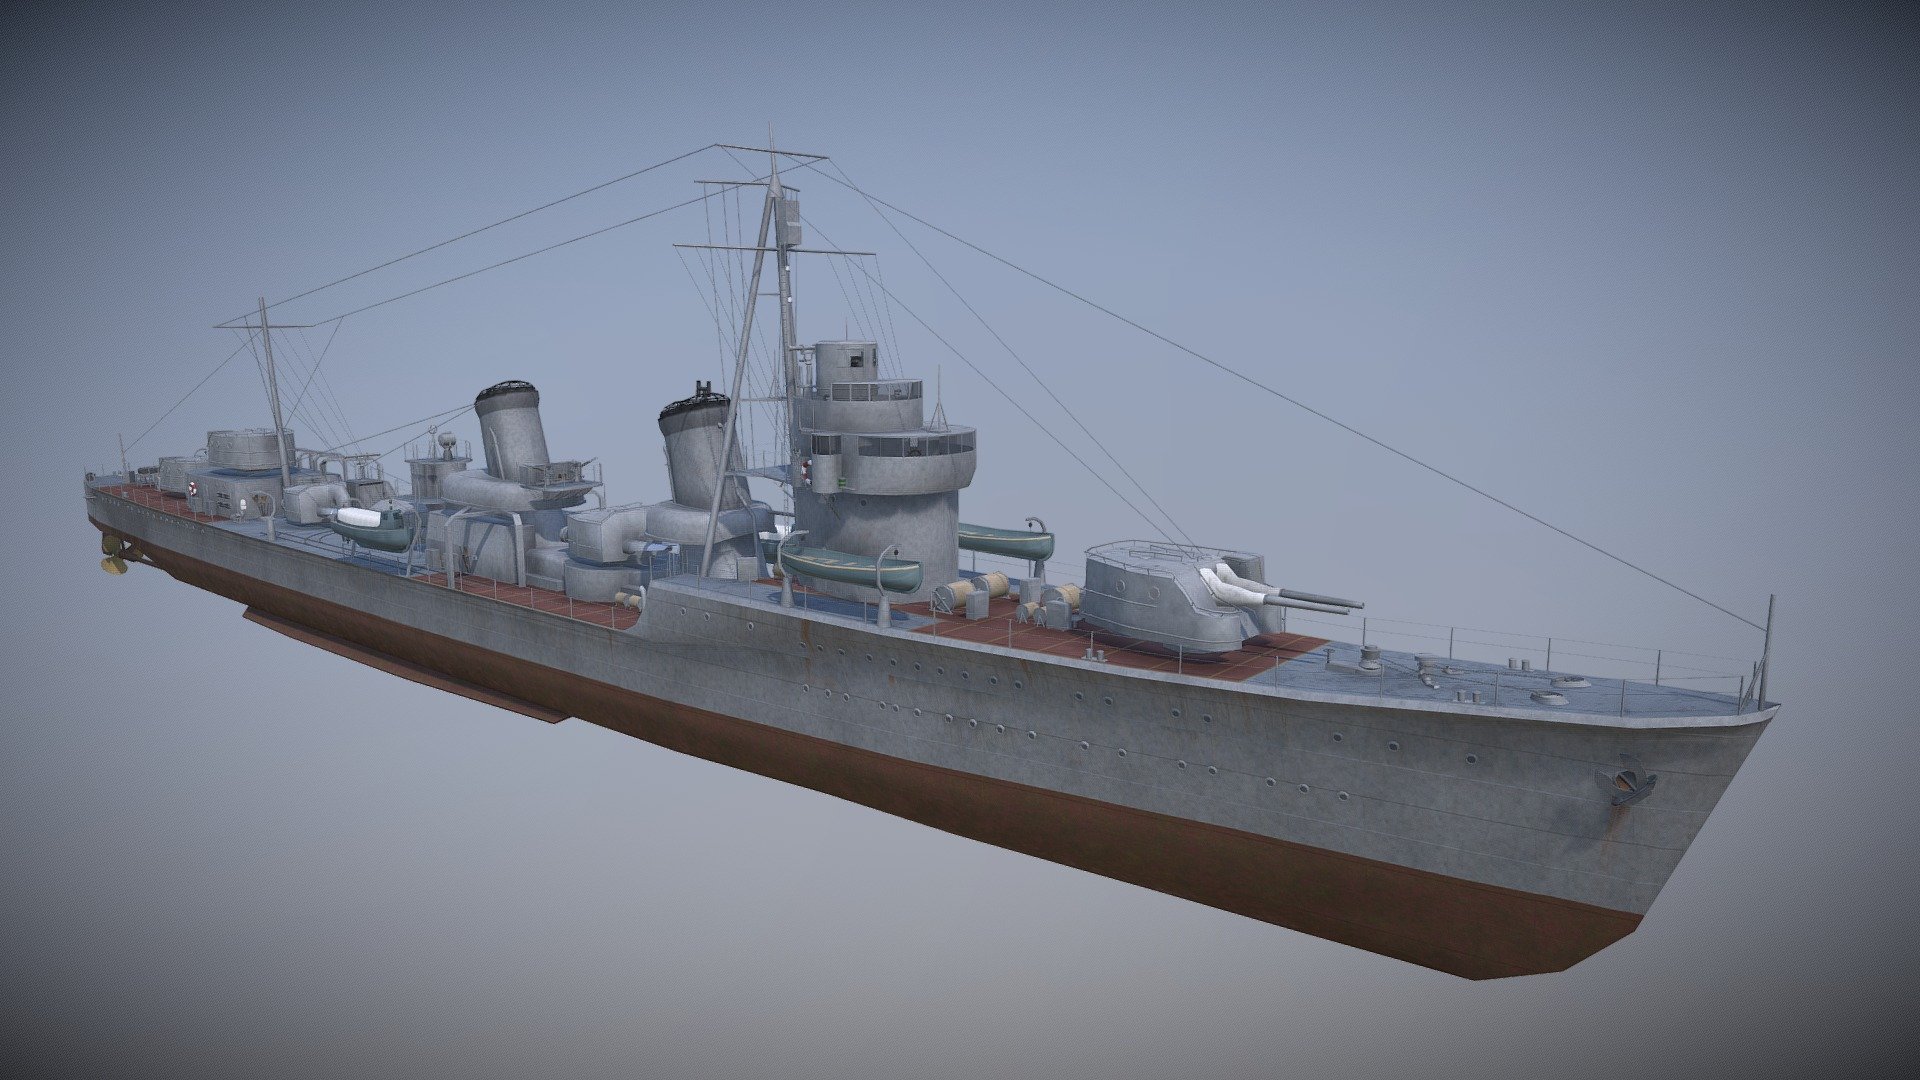 It's almost a year ago that I uploaded my first ship model, the IJN Fubuki, so I decided to make one of her more advanced sister ships: The IJN Ayanami.

The Ayanami was build for the Imperial Japanese Navy and when introduced into service she was one of the most powerful destroyer in the world. 
She sustained critical damage after being shelled by the USS Washington during the second phase of the Battle of Guadalcanal (15 November 1942) and was later scuttled by IJN Uranami.

(reuploaded on 11/21/2021 with remodelled bridge, new textures for hull and boats) - Ayanami - Buy Royalty Free 3D model by ThomasBeerens 3d model